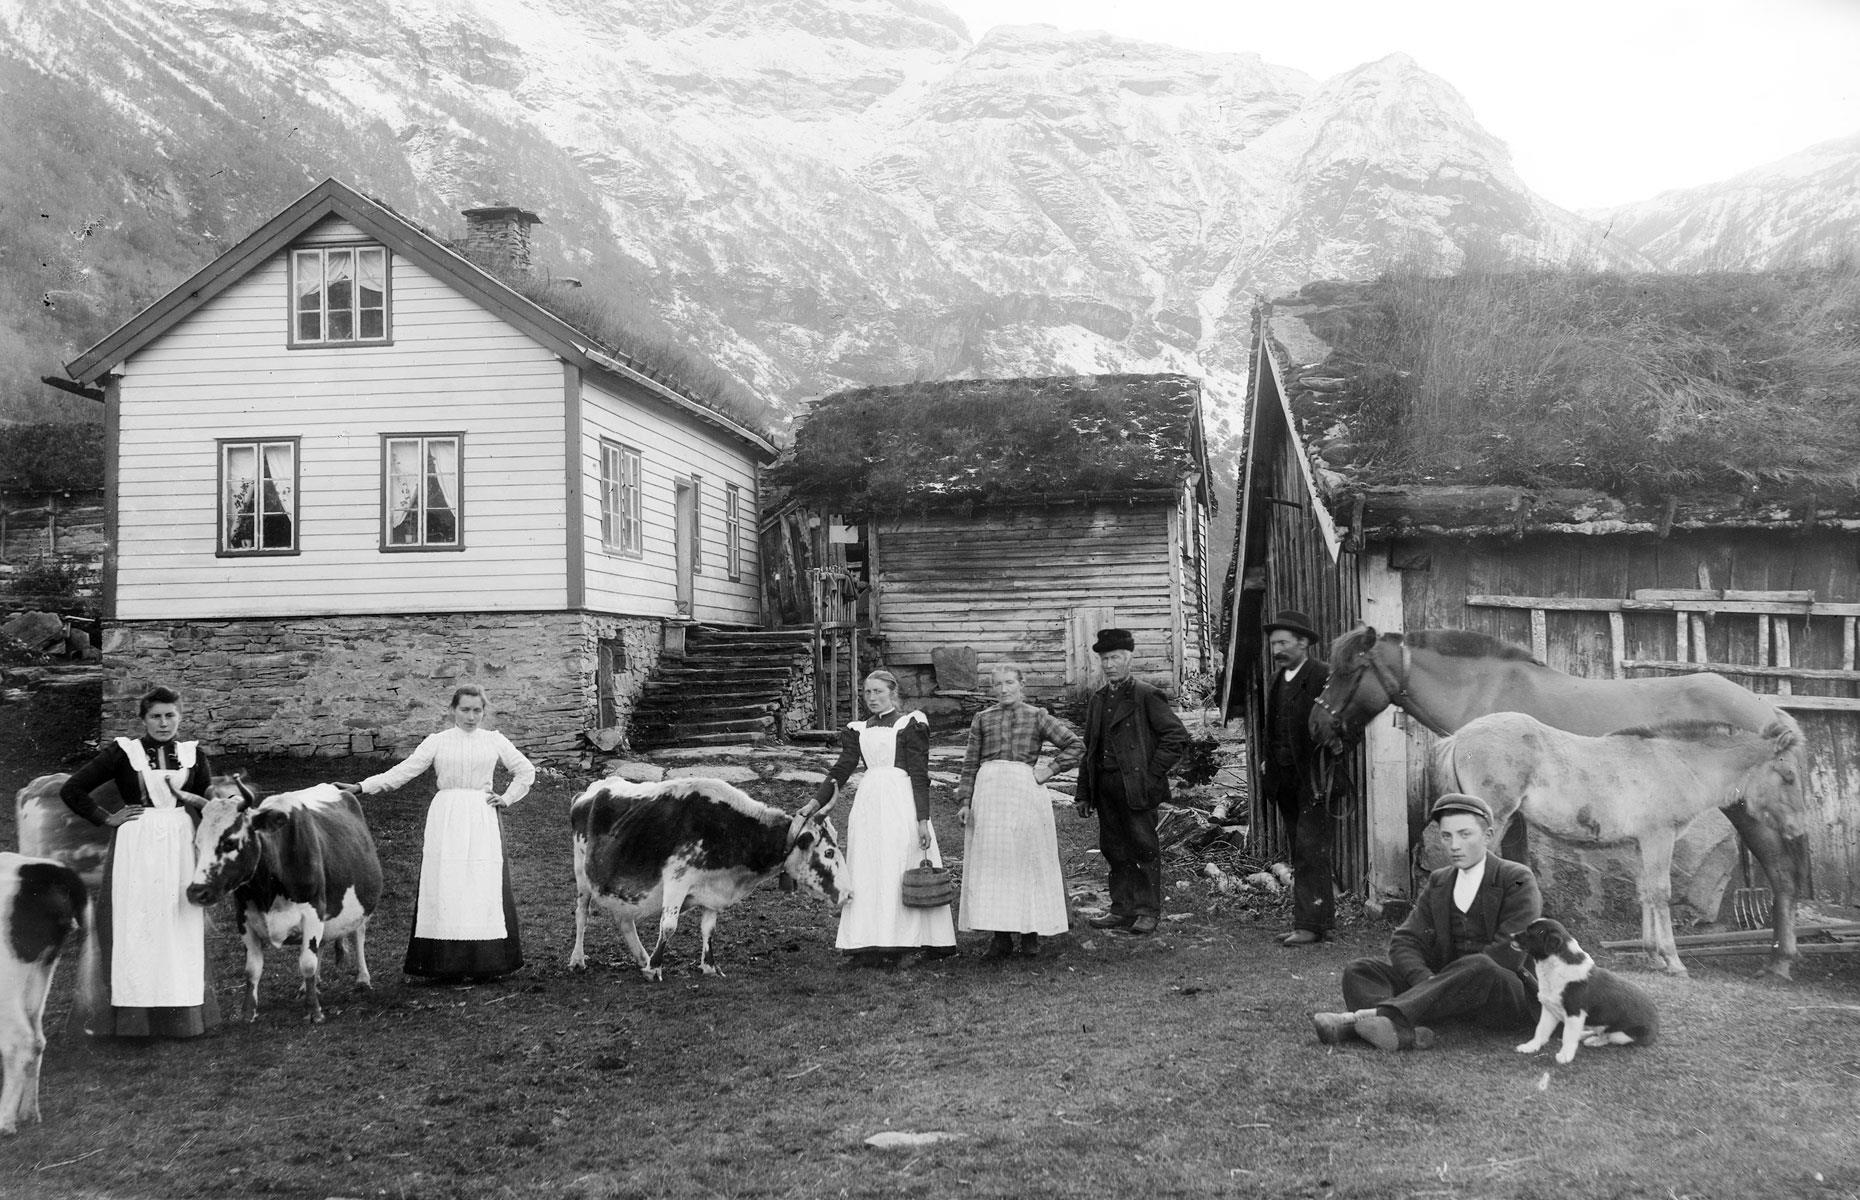 <p>However, hardship prevailed in Norway during the 19th century. The bulk of the population worked in the agriculture and fishing industries, and wages were appallingly low. By the early 20th century, around 800,000 Norwegians had left to try their luck in the USA. </p>  <p>The country's financial situation improved in the early 20th century when the Norwegian government began to develop a hydroelectric power industry, which provided jobs and boosted GDP.</p>